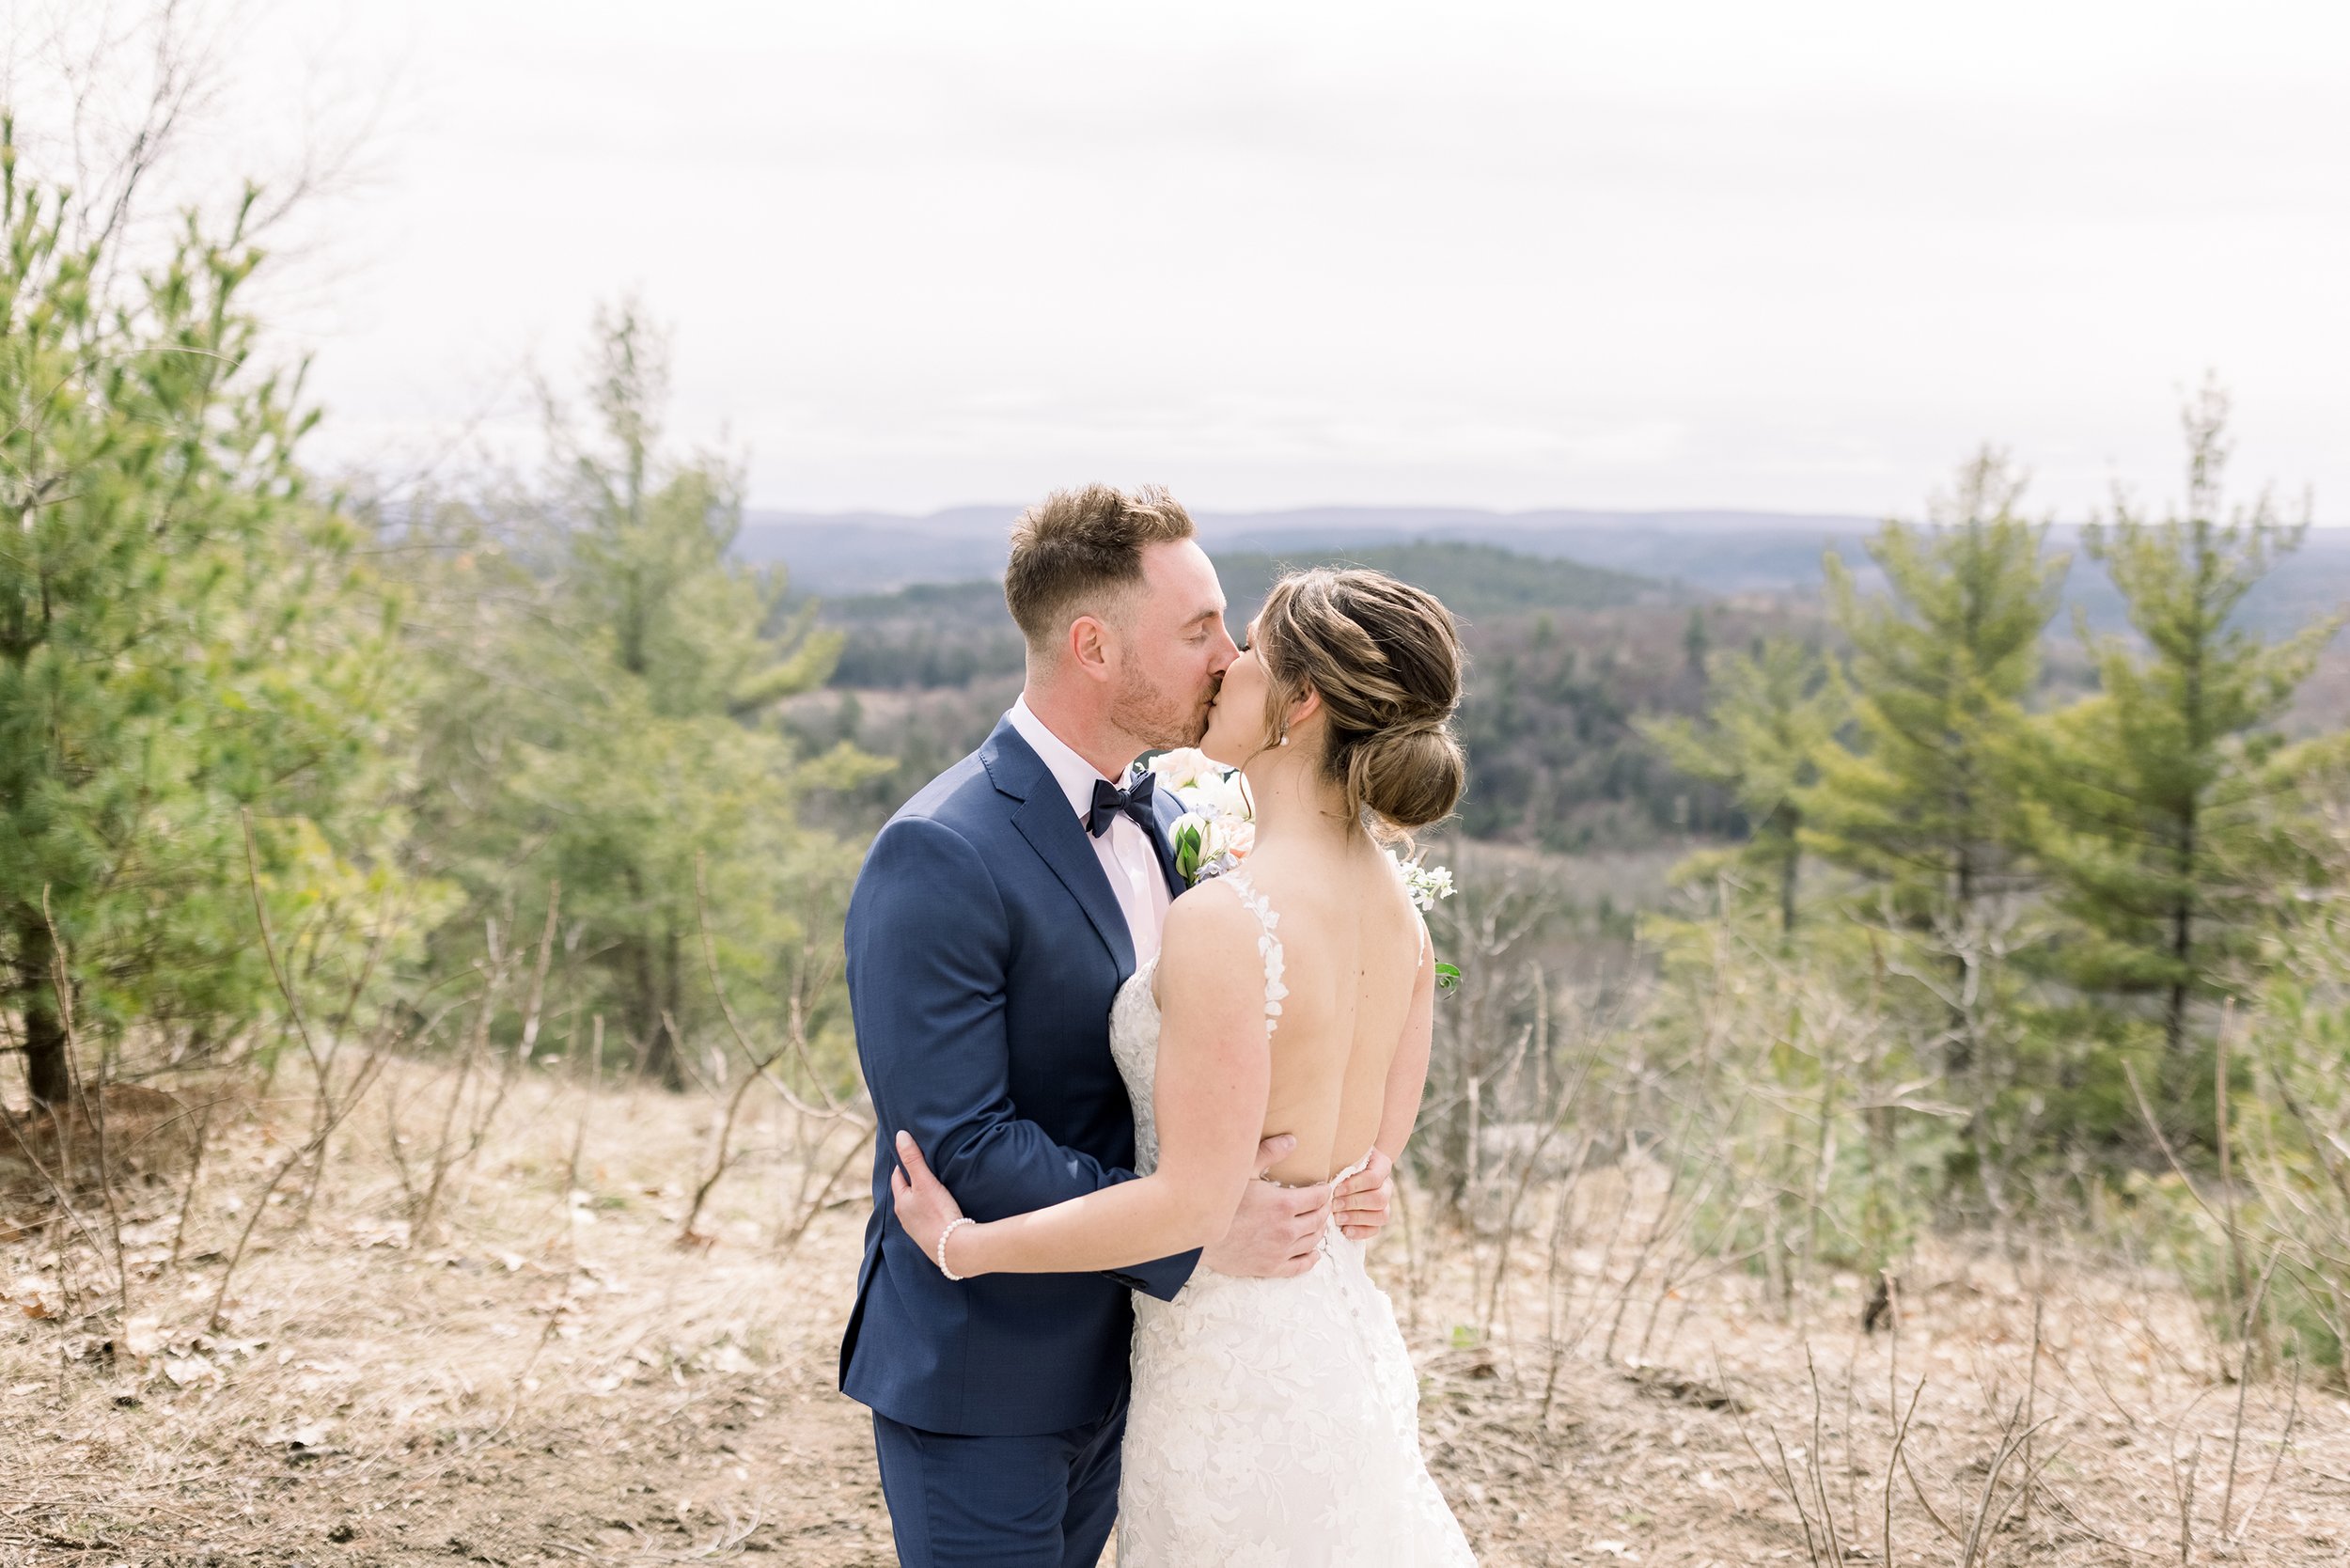  The bride and groom share a kiss on a mountain near Wakefield by Chelsea Mason Photography. newlyweds mountain wedding #ChelseaMasonPhotography #ChelseaMasonWeddings #WakefieldWeddings #LeBelvedere #Wakefieldweddingphotographers 